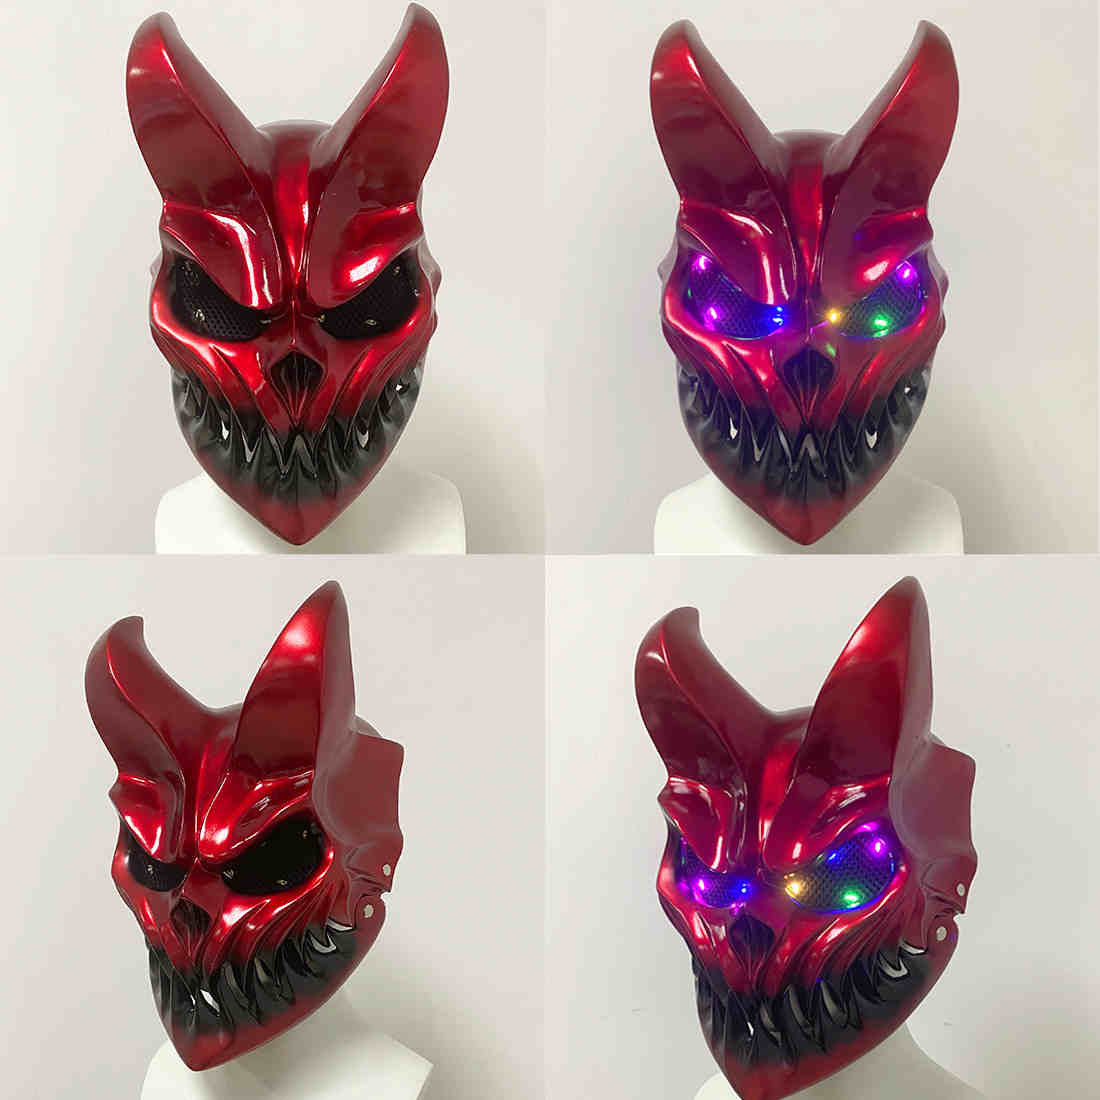 démon Masque Slaughter Primauté Masque Kid of darkness démolisseur Masque LEd Light Up Scary Halloween Masque Glowing